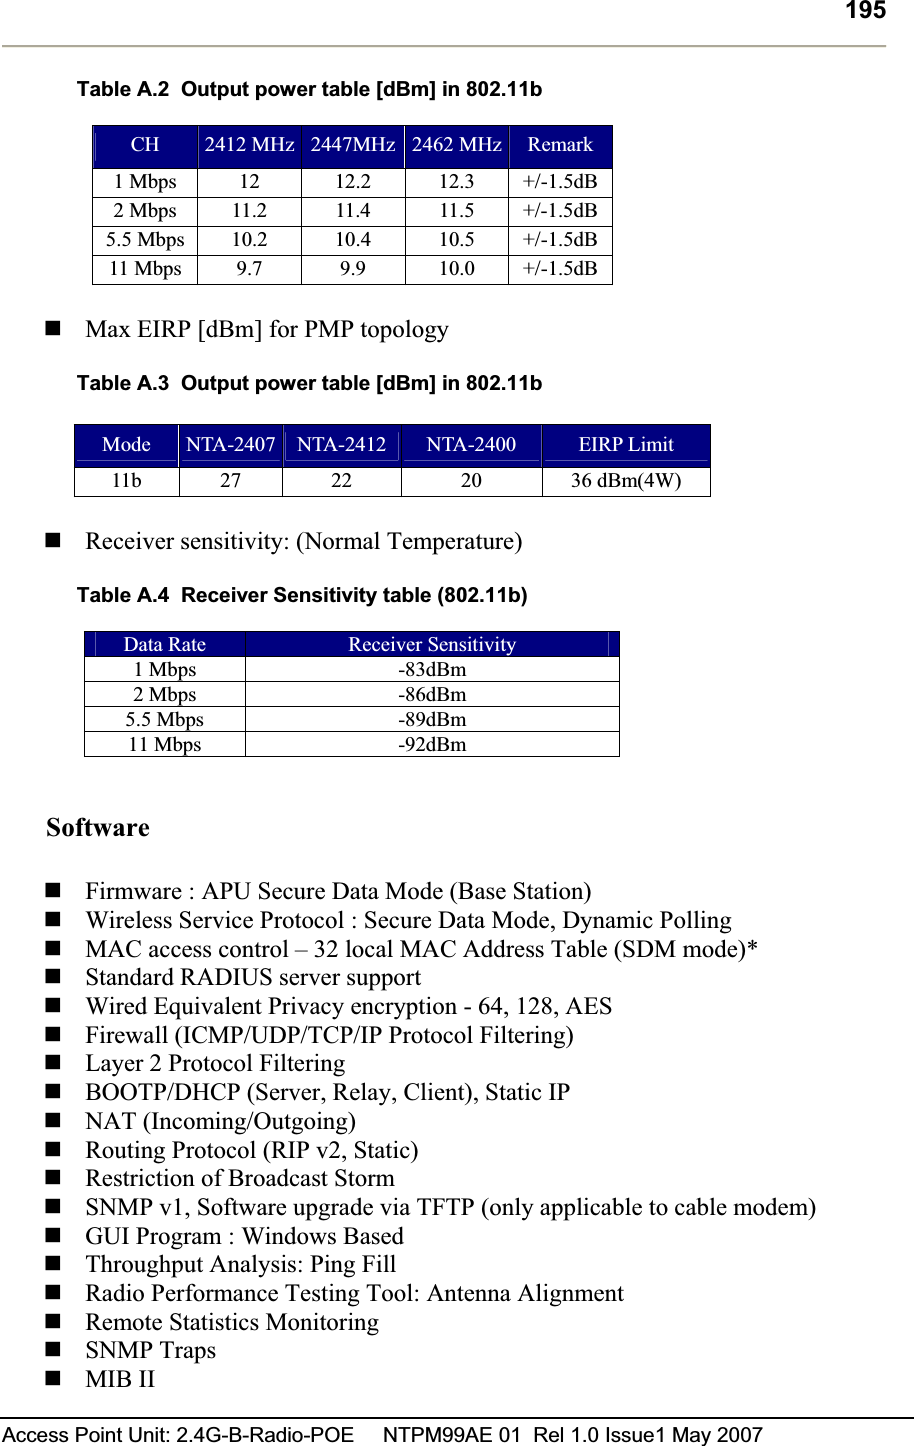 195Access Point Unit: 2.4G-B-Radio-POE     NTPM99AE 01  Rel 1.0 Issue1 May 2007 Table A.2  Output power table [dBm] in 802.11b CH 2412 MHz  2447MHz 2462 MHz Remark1 Mbps  12  12.2  12.3  +/-1.5dB2 Mbps  11.2  11.4  11.5  +/-1.5dB5.5 Mbps  10.2  10.4  10.5  +/-1.5dB11 Mbps  9.7  9.9  10.0  +/-1.5dBMax EIRP [dBm] for PMP topology Table A.3  Output power table [dBm] in 802.11b Mode  NTA-2407  NTA-2412 NTA-2400  EIRP Limit 11b 27  22  20  36 dBm(4W) Receiver sensitivity: (Normal Temperature) Table A.4  Receiver Sensitivity table (802.11b) Data Rate  Receiver Sensitivity 1 Mbps  -83dBm 2 Mbps  -86dBm 5.5 Mbps  -89dBm 11 Mbps  -92dBm SoftwareFirmware : APU Secure Data Mode (Base Station)  Wireless Service Protocol : Secure Data Mode, Dynamic Polling  MAC access control – 32 local MAC Address Table (SDM mode)*   Standard RADIUS server support            Wired Equivalent Privacy encryption - 64, 128, AES Firewall (ICMP/UDP/TCP/IP Protocol Filtering) Layer 2 Protocol Filtering BOOTP/DHCP (Server, Relay, Client), Static IP  NAT (Incoming/Outgoing) Routing Protocol (RIP v2, Static)Restriction of Broadcast Storm  SNMP v1, Software upgrade via TFTP (only applicable to cable modem) GUI Program : Windows Based Throughput Analysis: Ping Fill  Radio Performance Testing Tool: Antenna Alignment Remote Statistics Monitoring SNMP Traps MIB II 